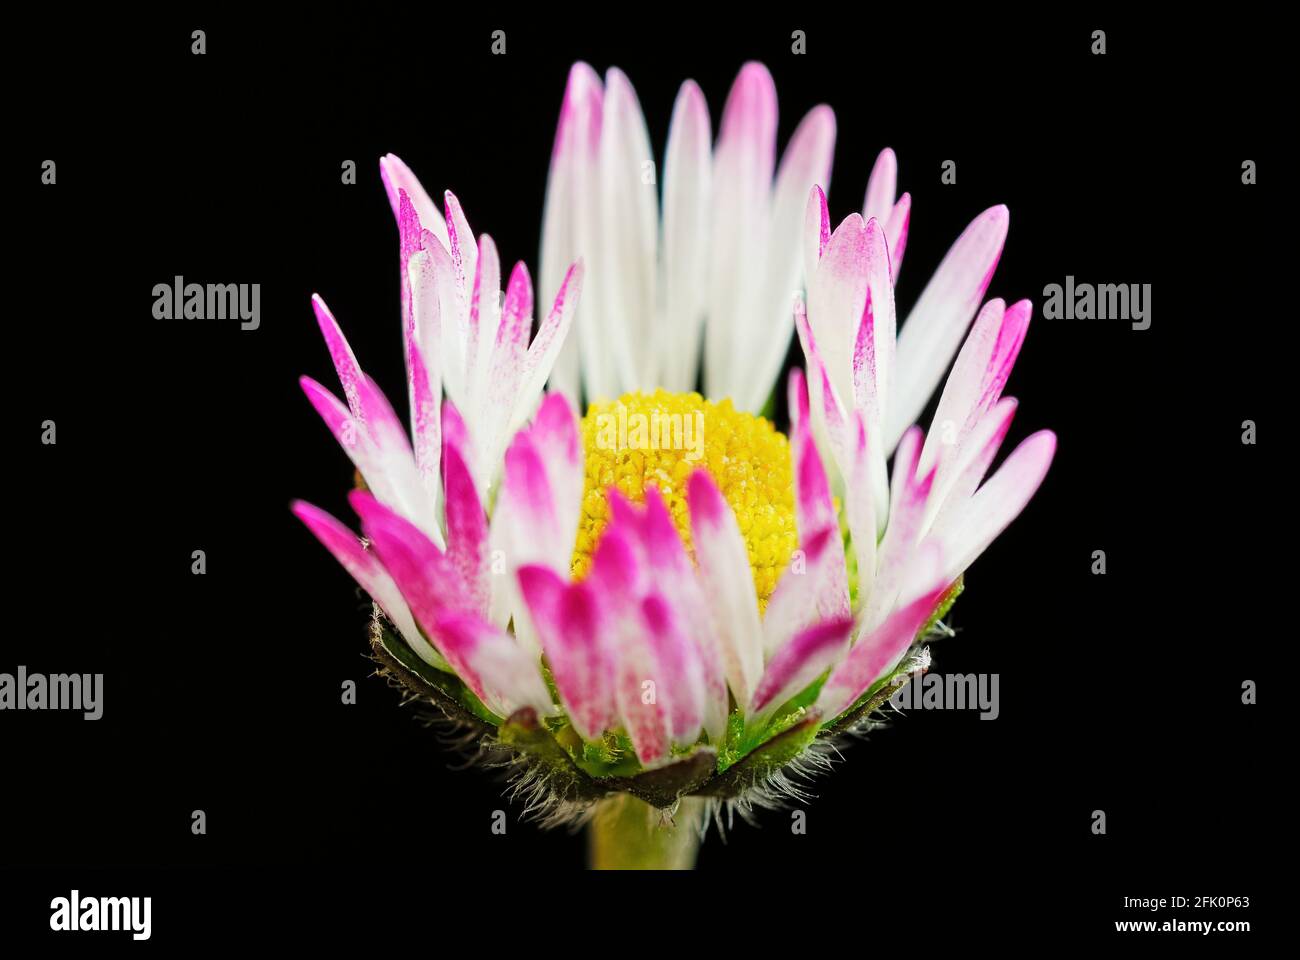 Tiny common daisy flower with beautiful petals in purple white. Isolated on black background. Known medicinal plant. Genus Bellis perennis. Stock Photo